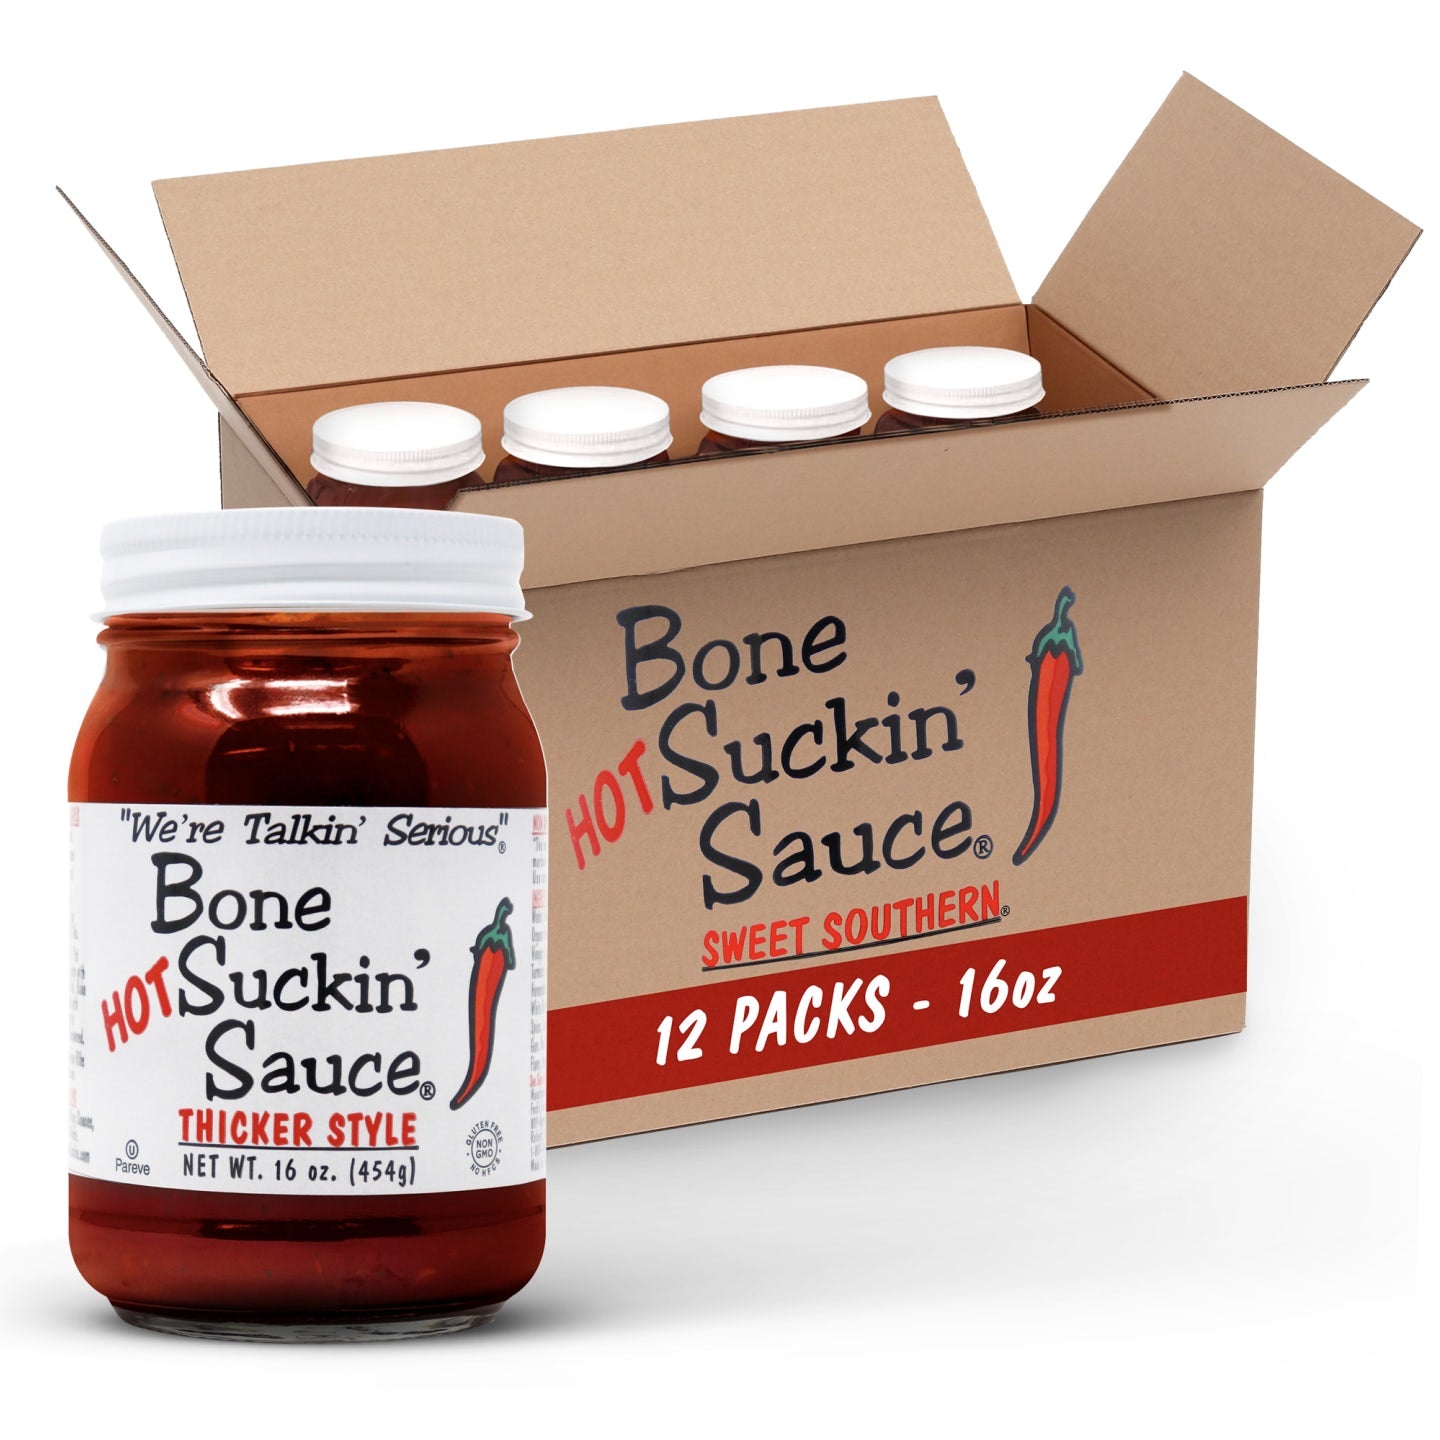 Bone Suckin' Sauce® Hot Thicker Style BBQ Sauce - 16 oz in Glass Bottle, Hot Thick Barbecue Sauce For Ribs, Chicken, Pork, Fish, Beef - Gluten-Free, Non-GMO, Kosher, Sweetened with Honey & Molasses-12 pack